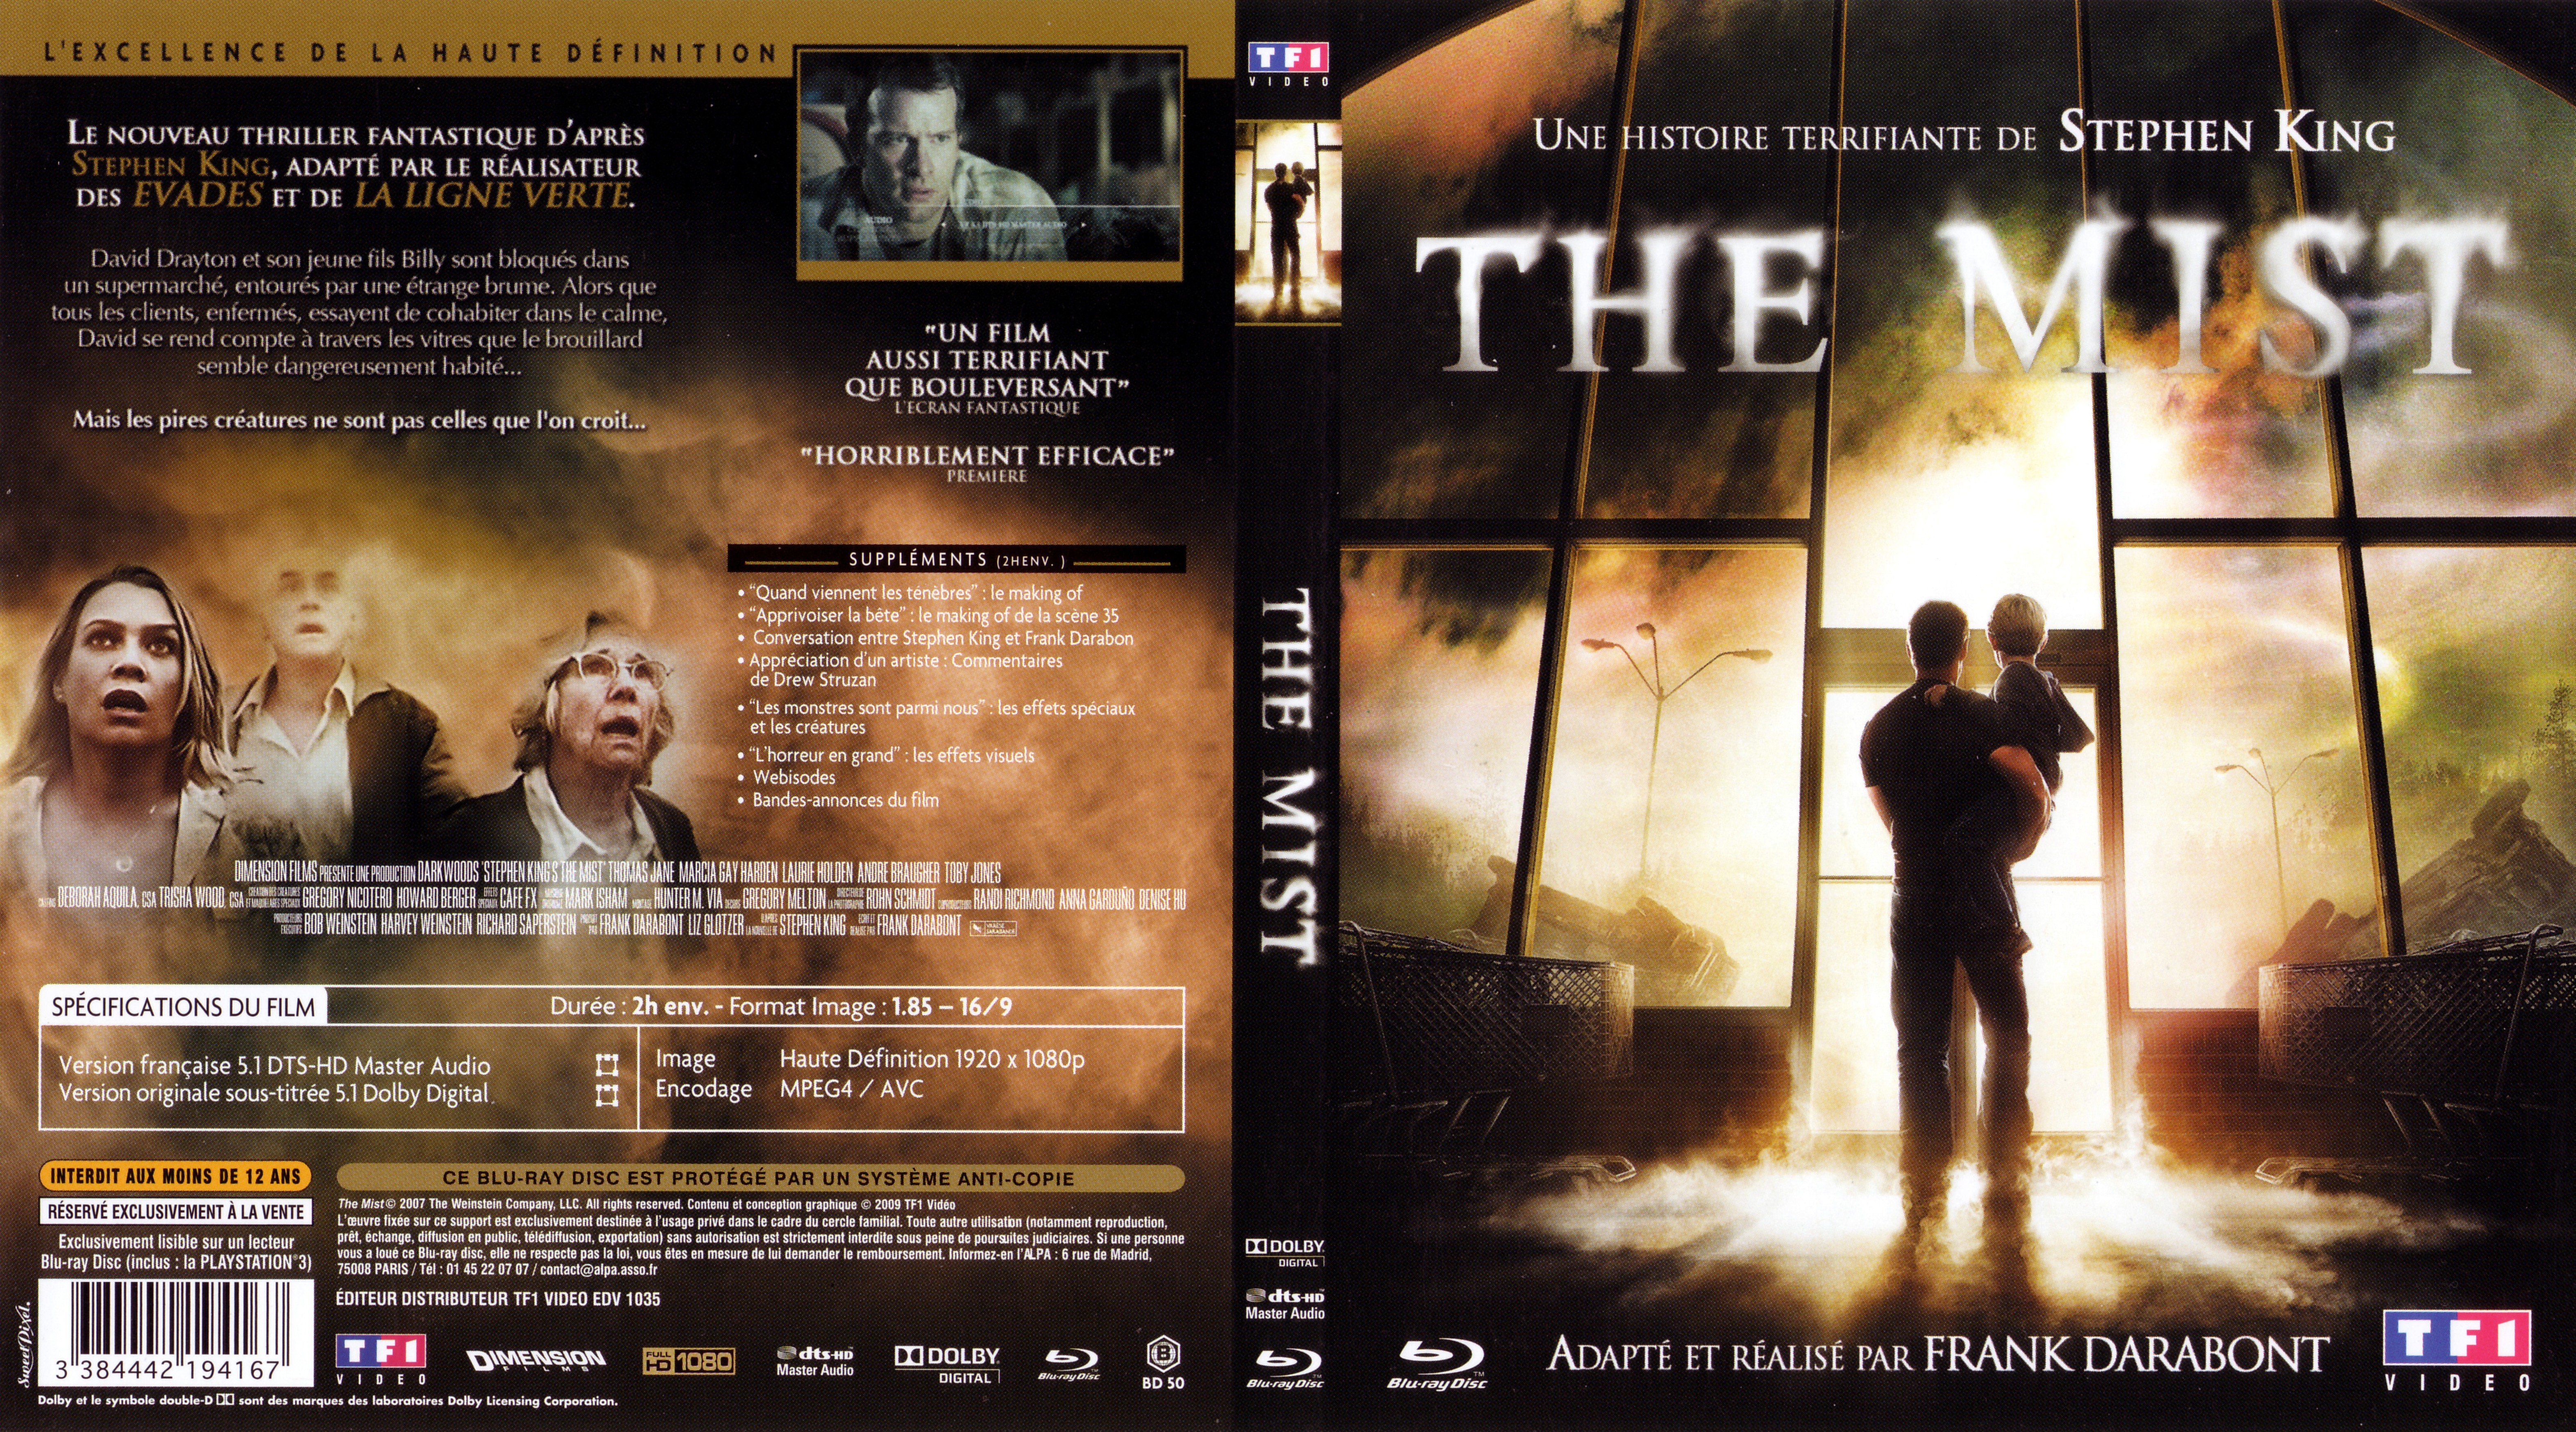 Jaquette DVD The mist (BLU-RAY) v3